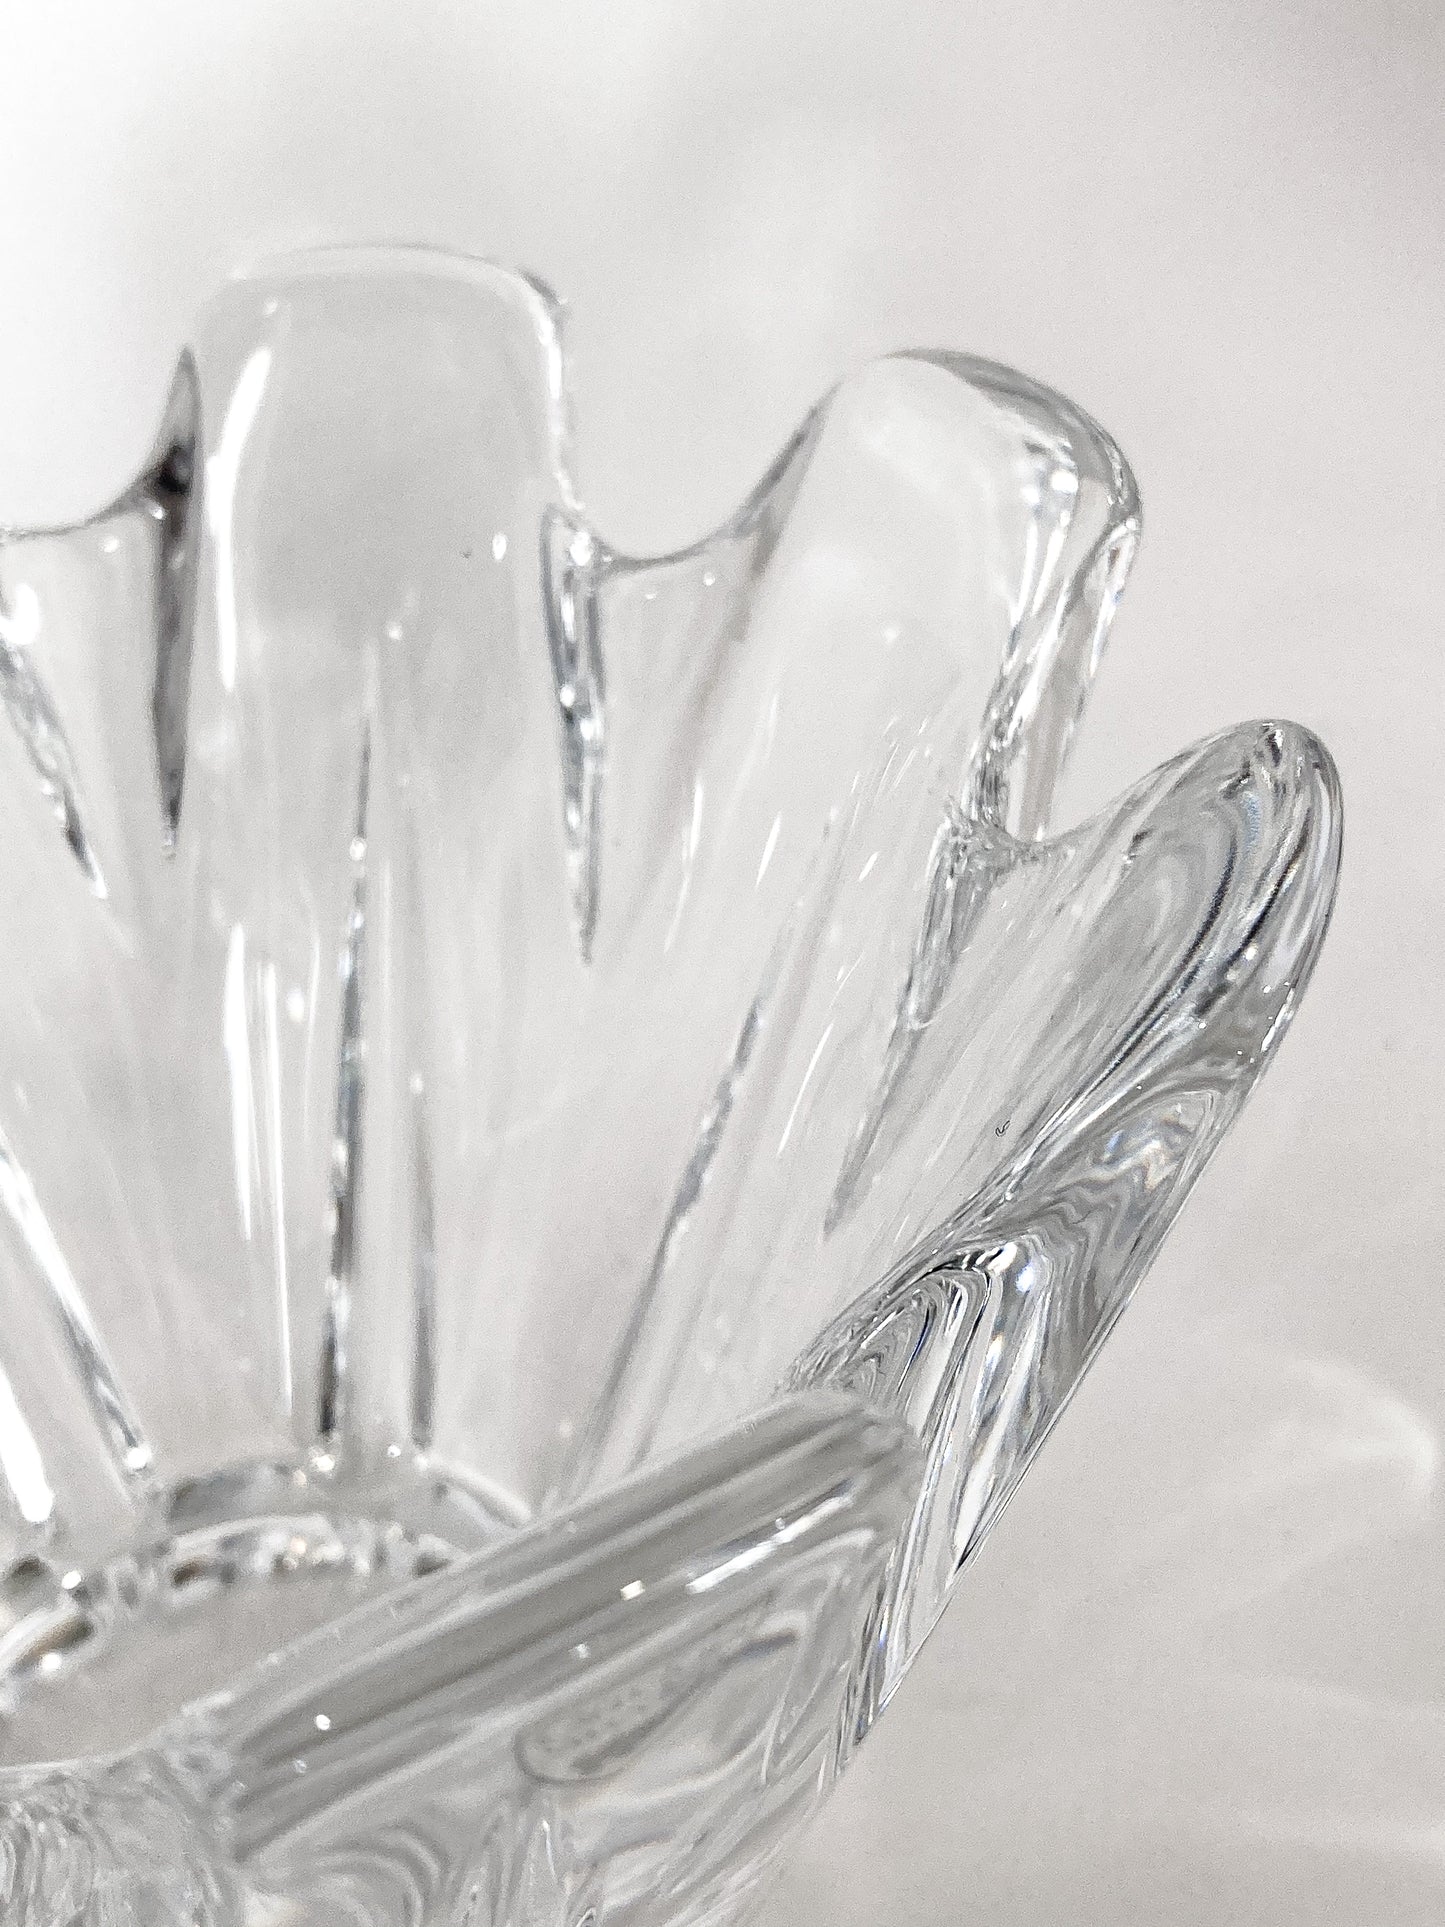 Clear Crystal Glass Scalloped Splash Orrefors Sweden Candy Dish Bowl Close Up Edge